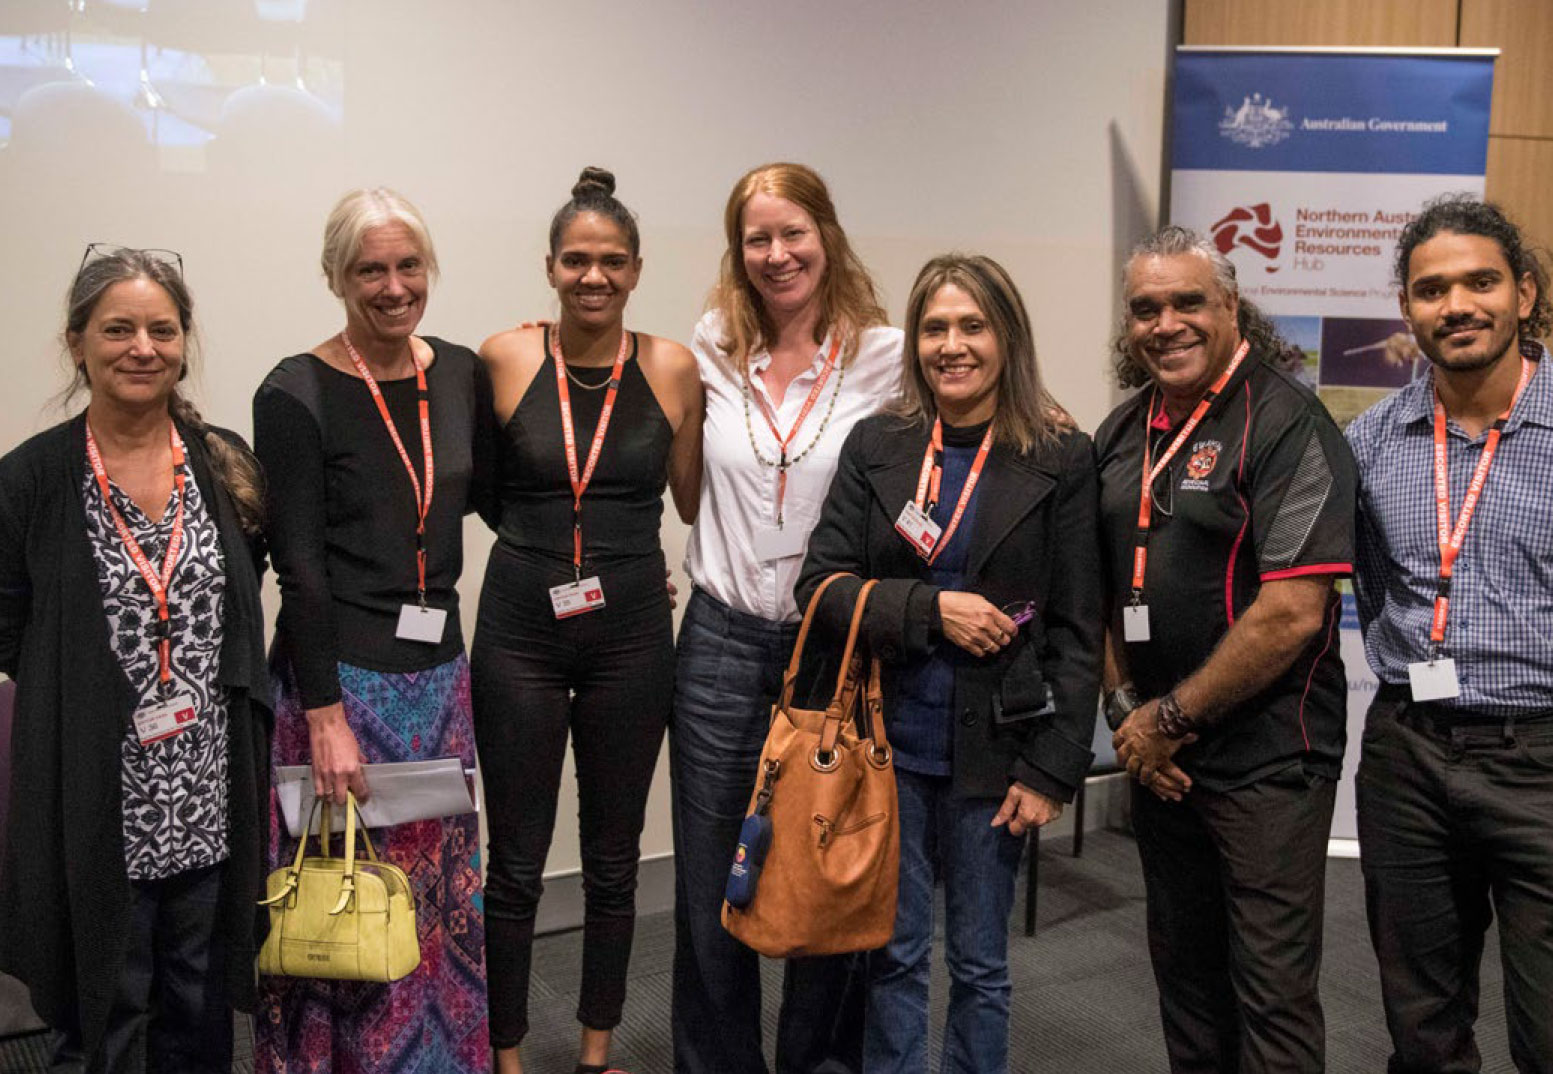 Photo of Natalie Stoeckl, Diane Jarvis, Celia Boxer, Jane Addison, Sharon Prior, David Hudson and Emile Boxer – researchers, co-researchers and collaborators. This group of seven are standing in front of a projector and pull-up banner.